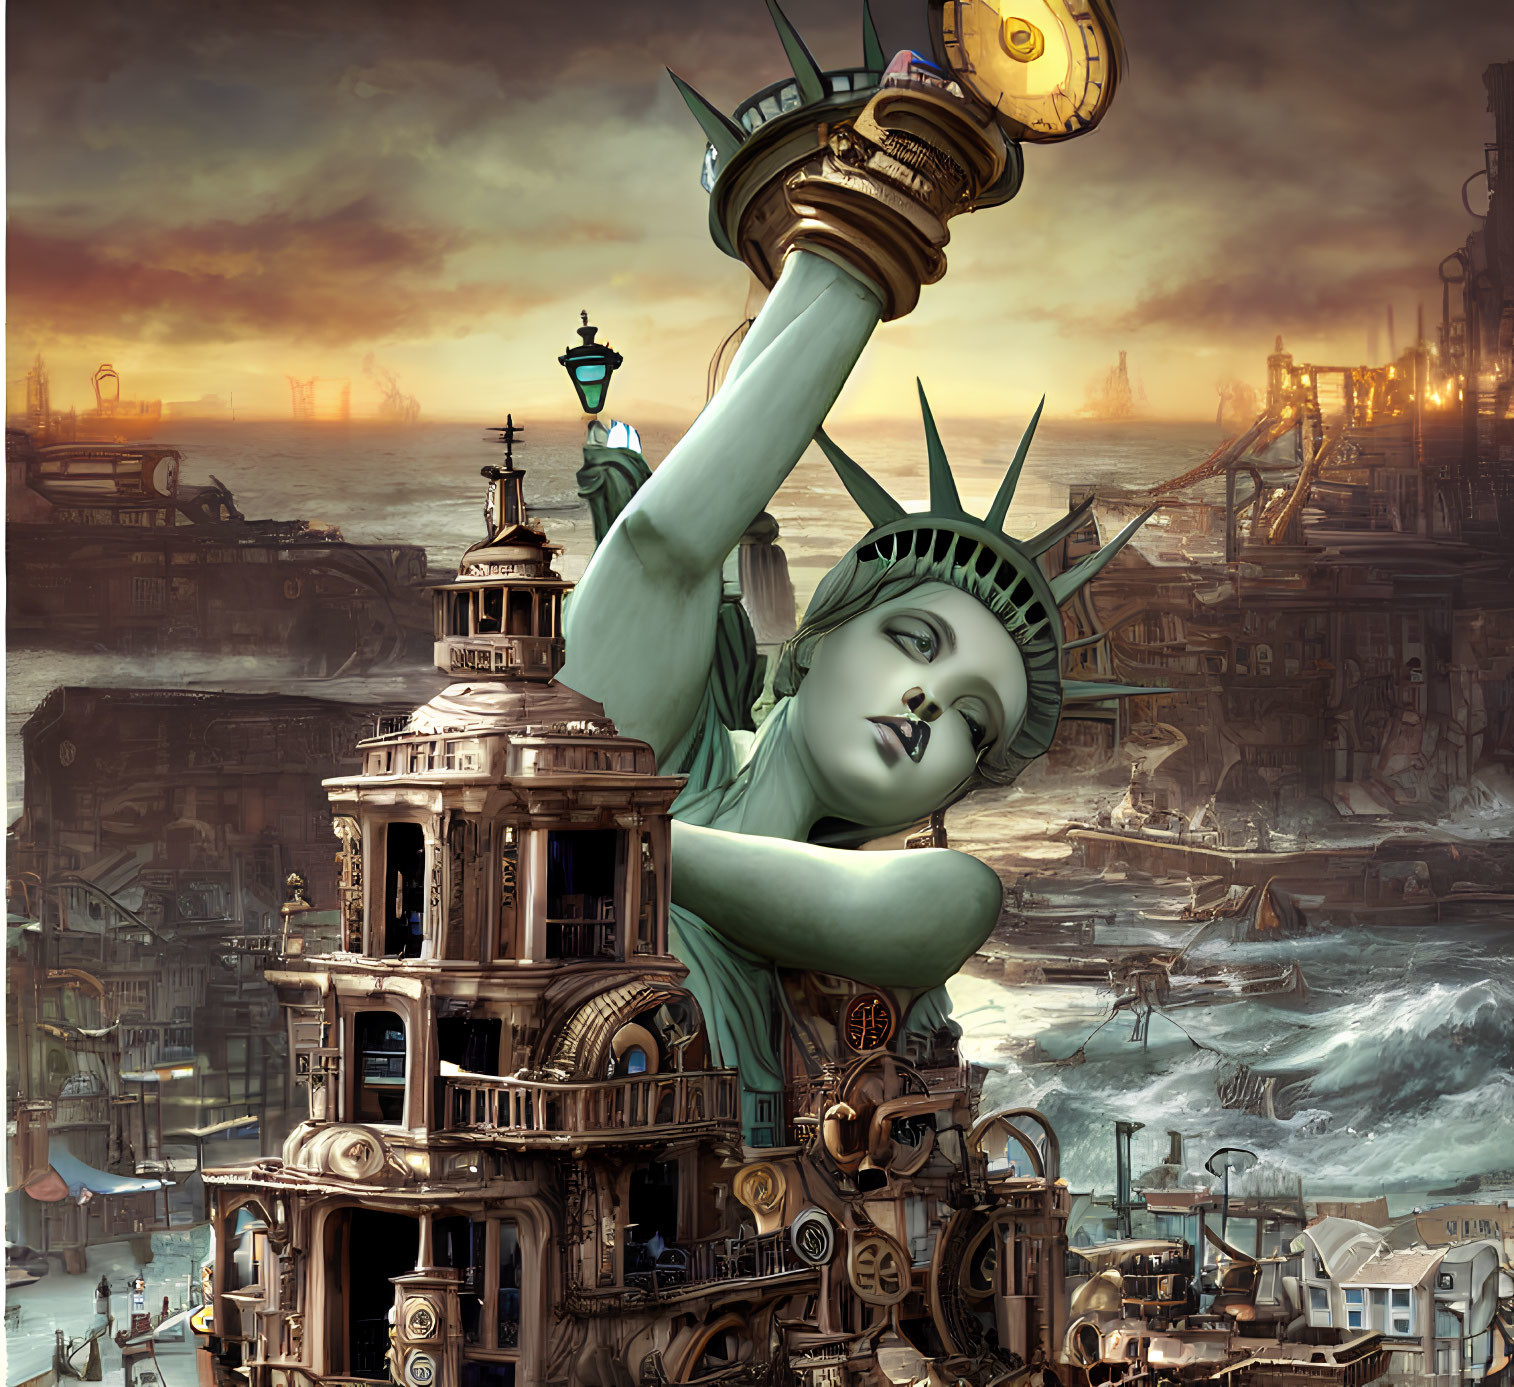 Steampunk Statue of Liberty with Industrial Cityscape and Airships